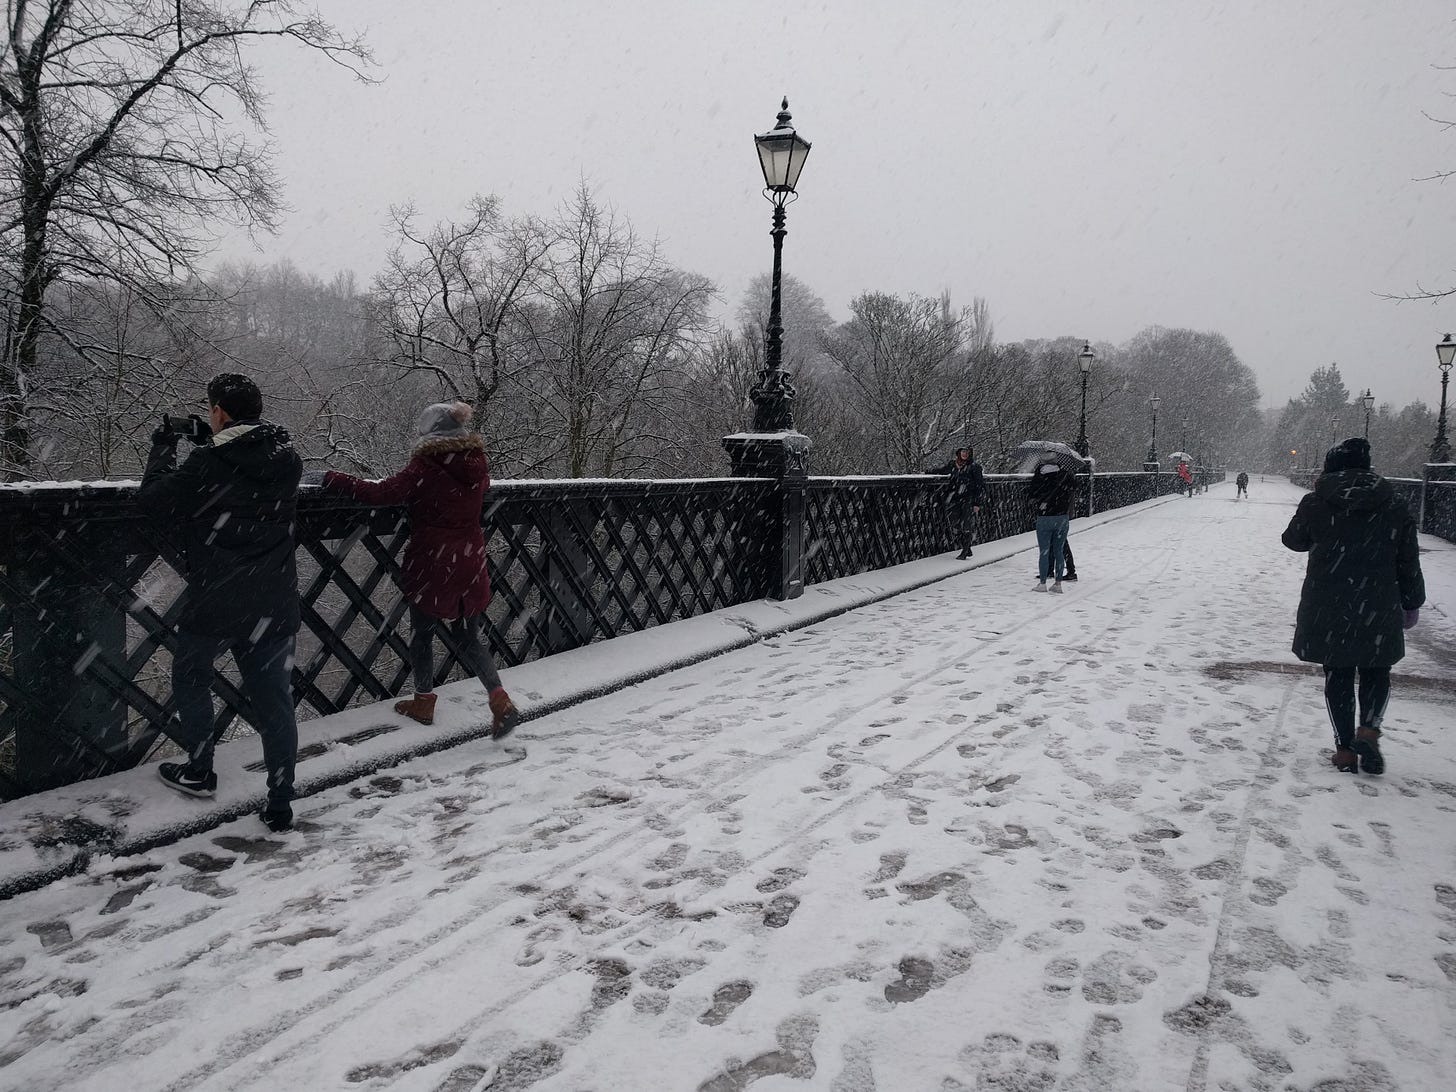 A snowy bridge. Many people are enjoying the bridge, including my then-housemates.